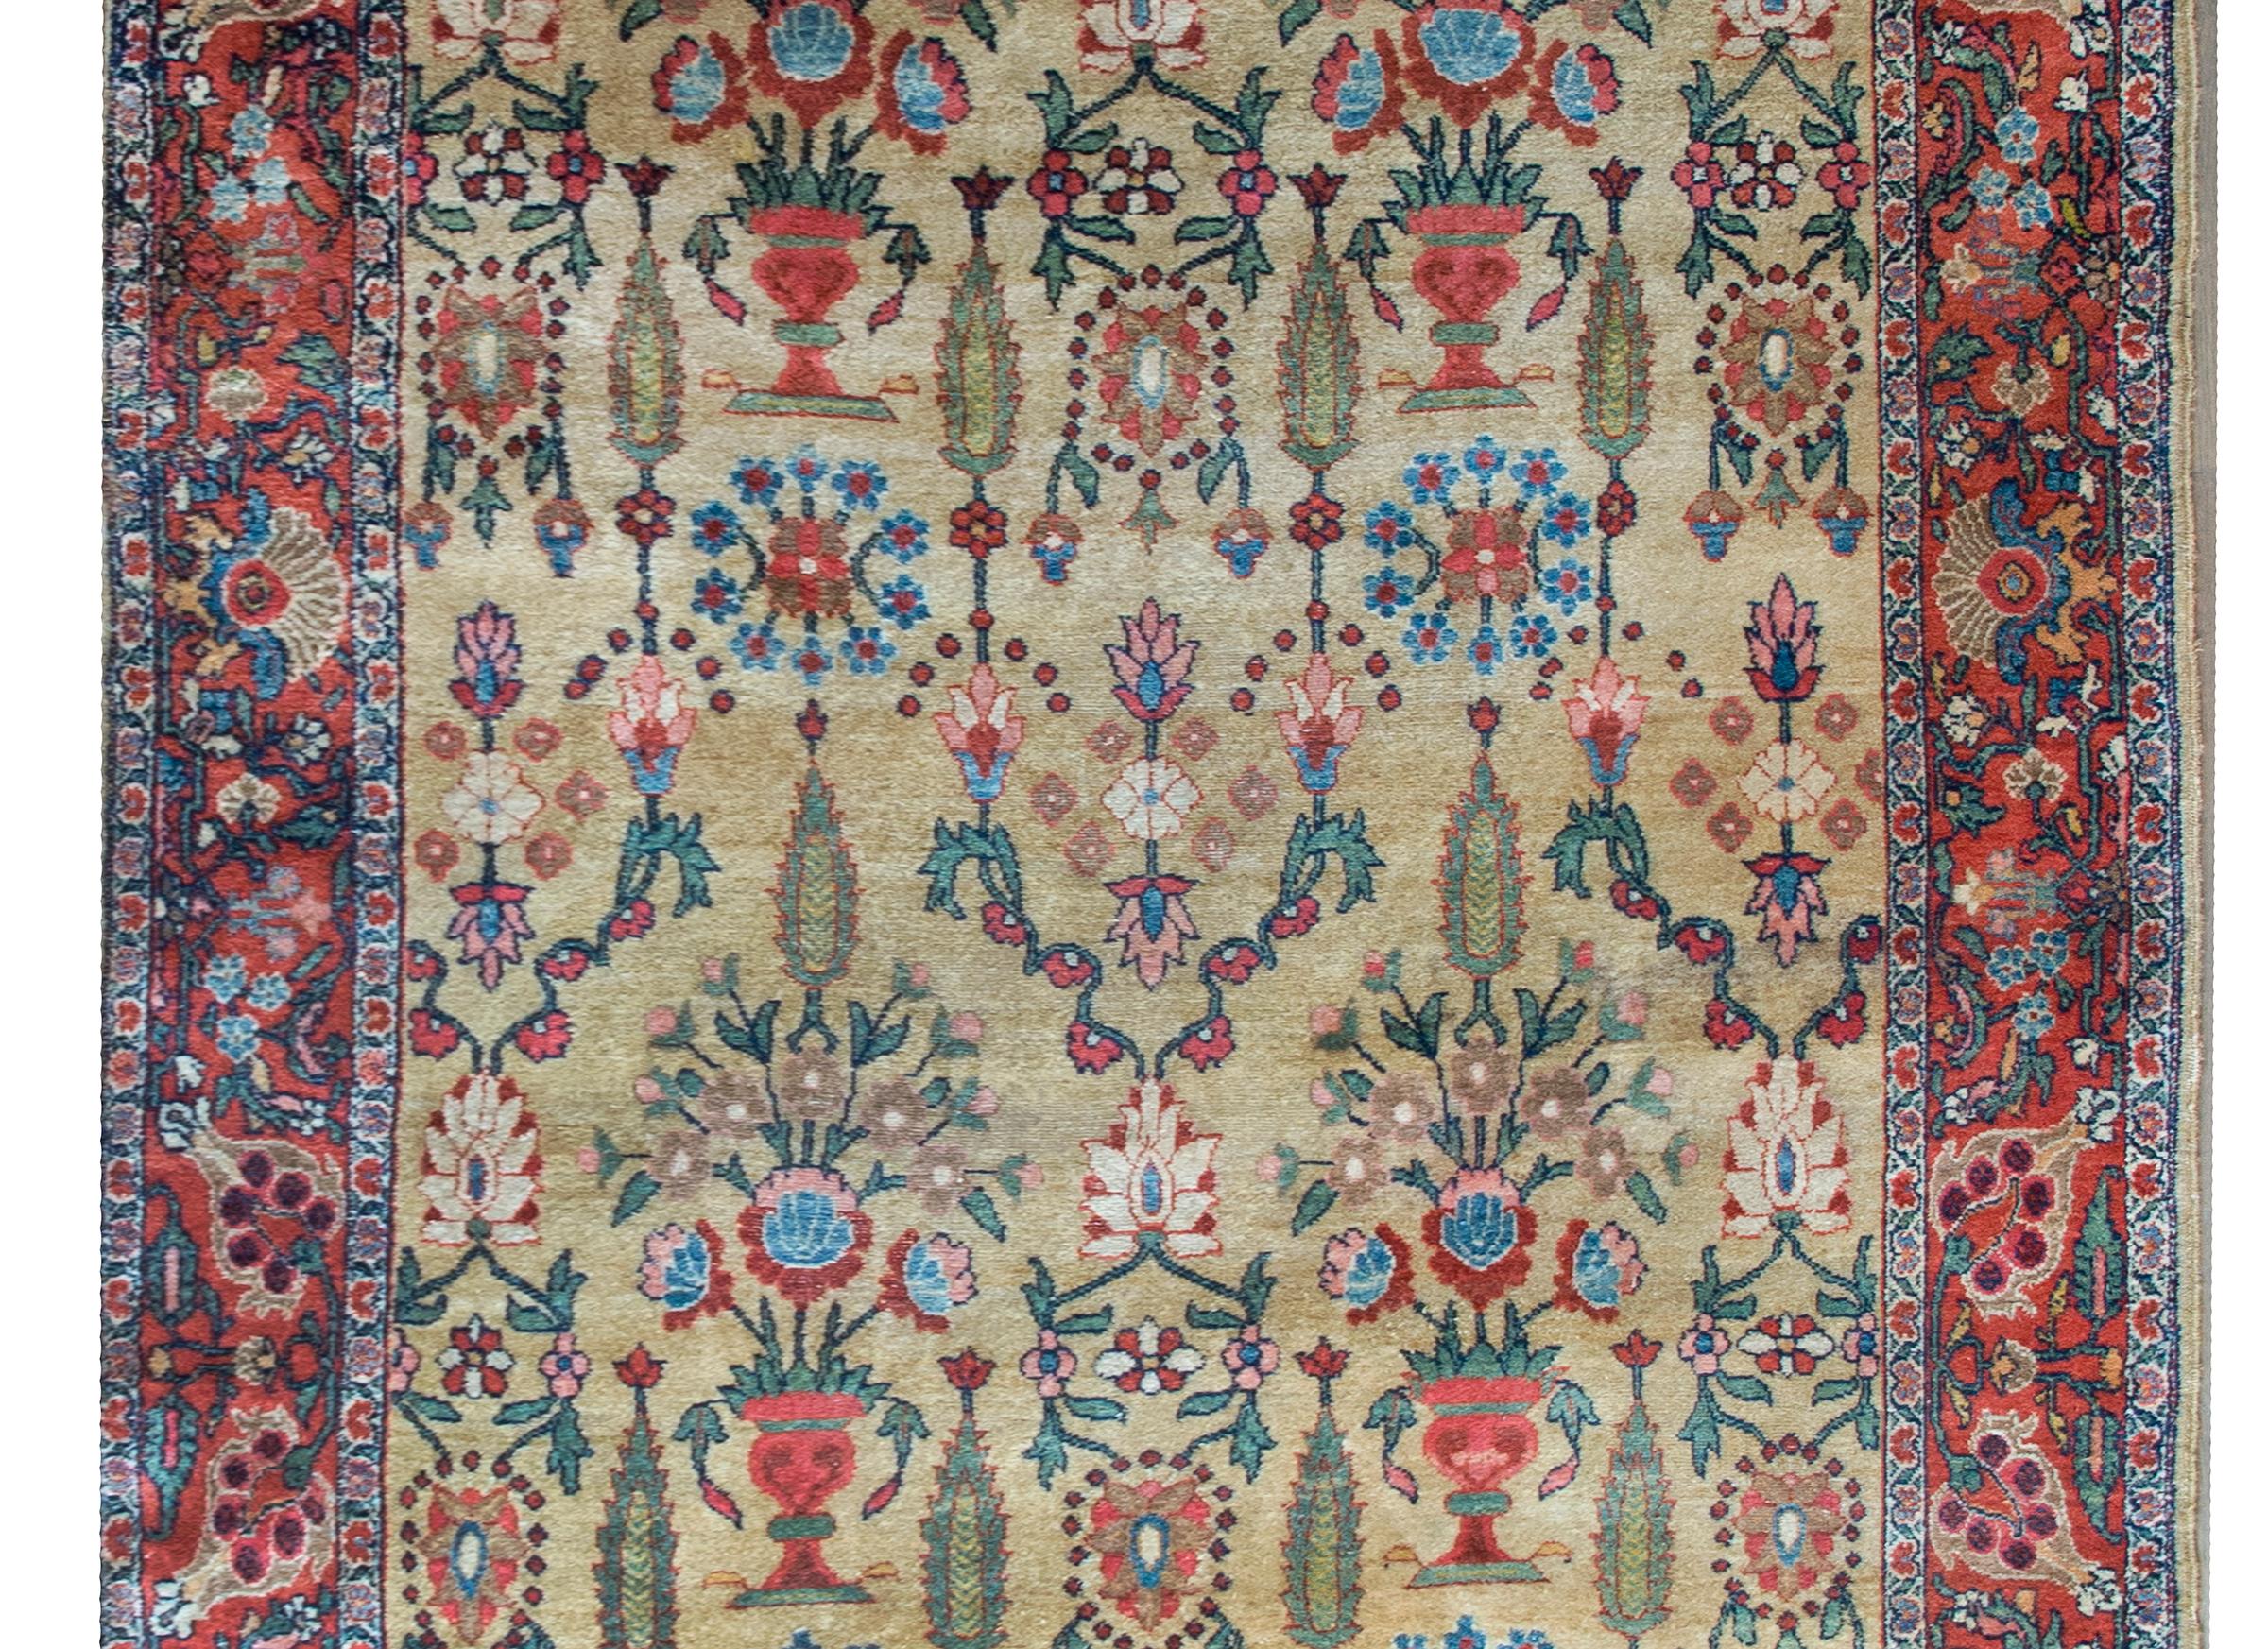 An extraordinary and impressive early 20th century Persian Sultanabad rug with the most beautiful all-over repeated floral potted vase pattern with scrolling vines and cypress trees, all woven in wonderful greens, crimsons, indigos, pinks, and